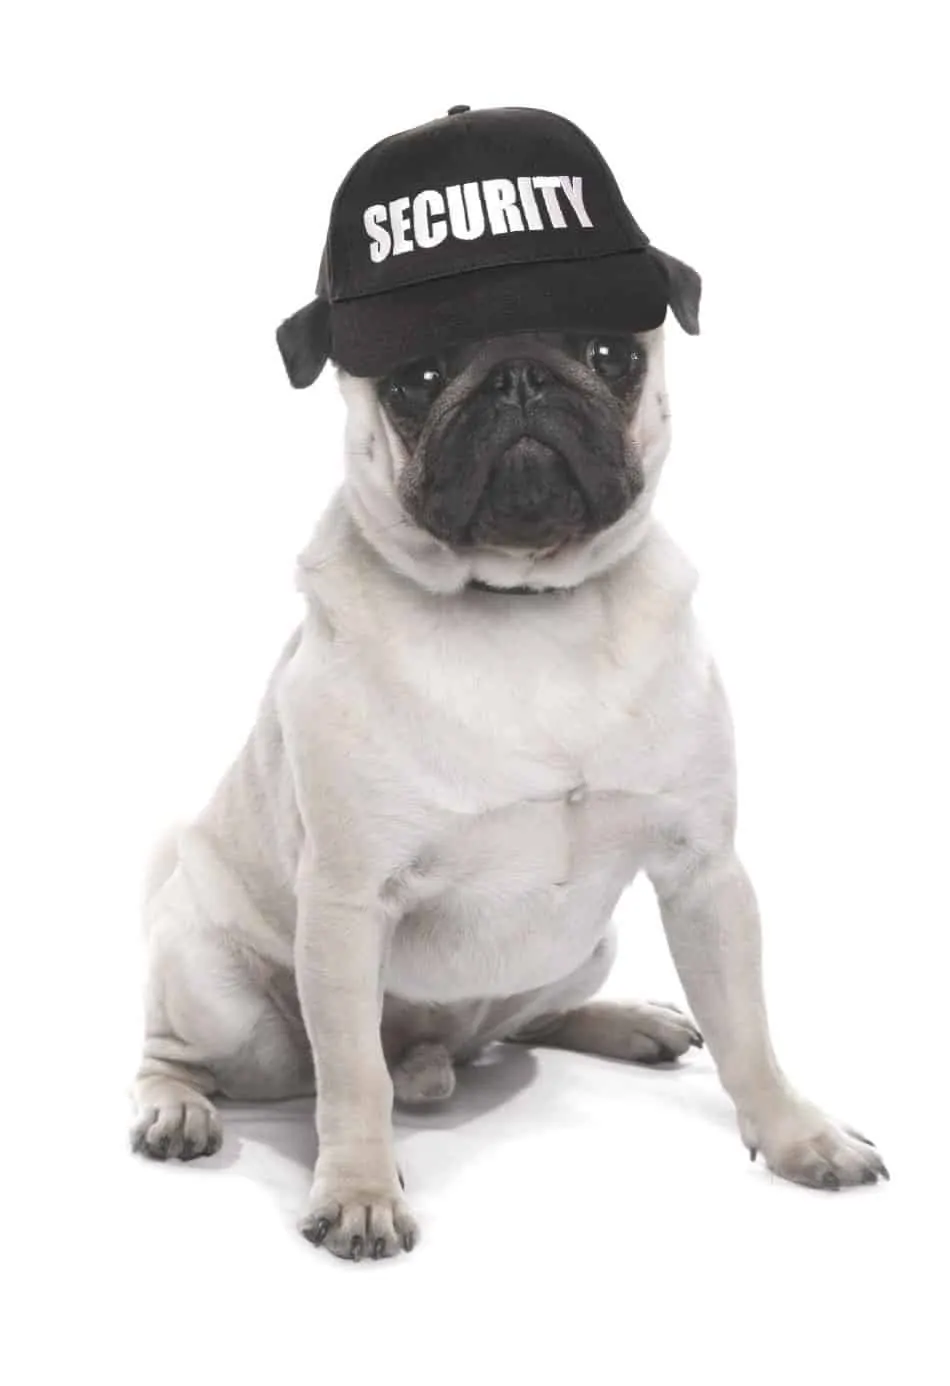 security guard dog pug wearing a hat that says security